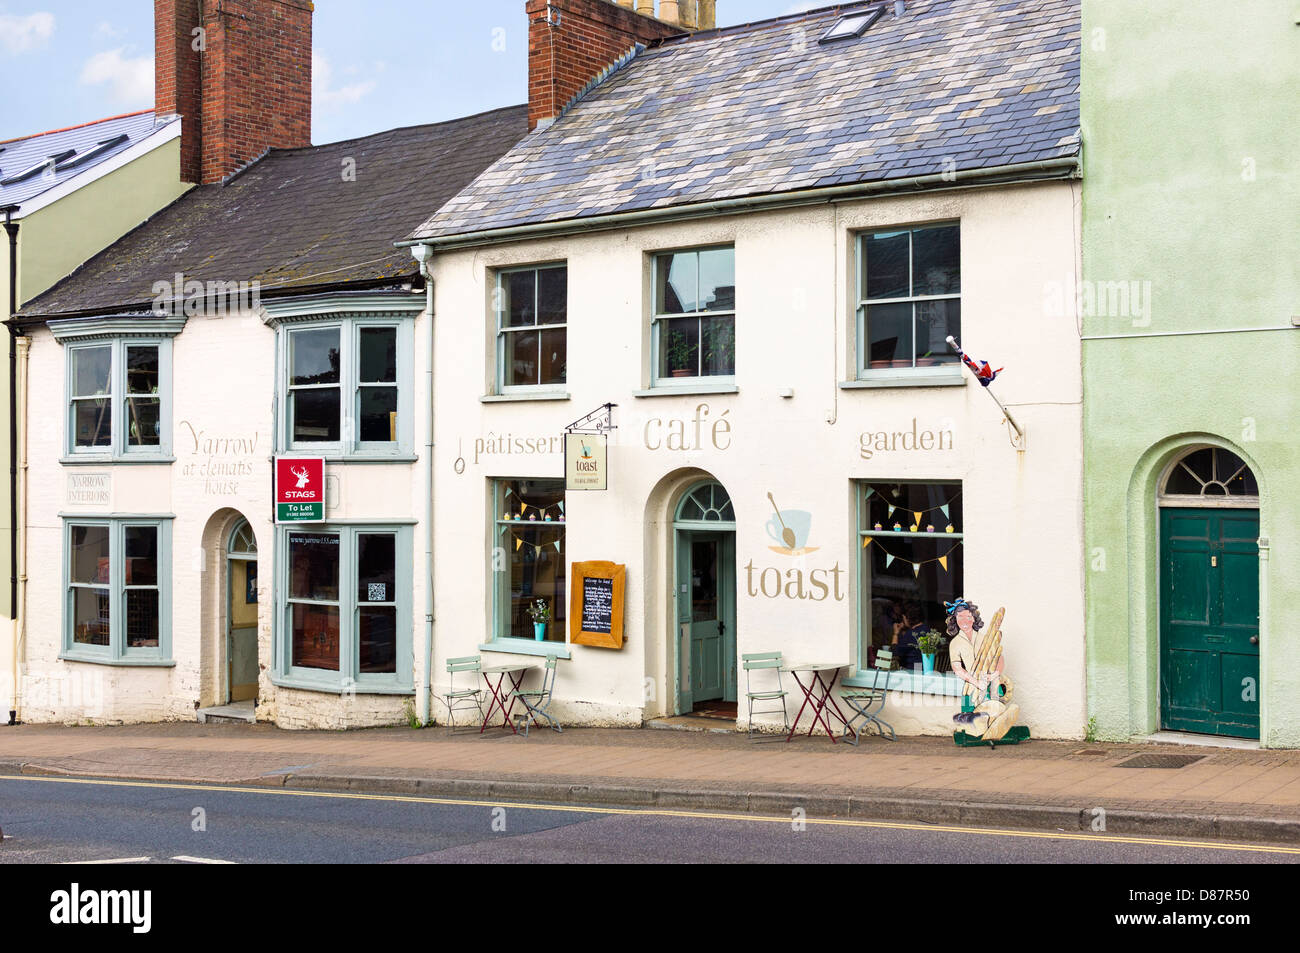 Cafe in an English town centre, Honiton, Devon, UK Stock Photo